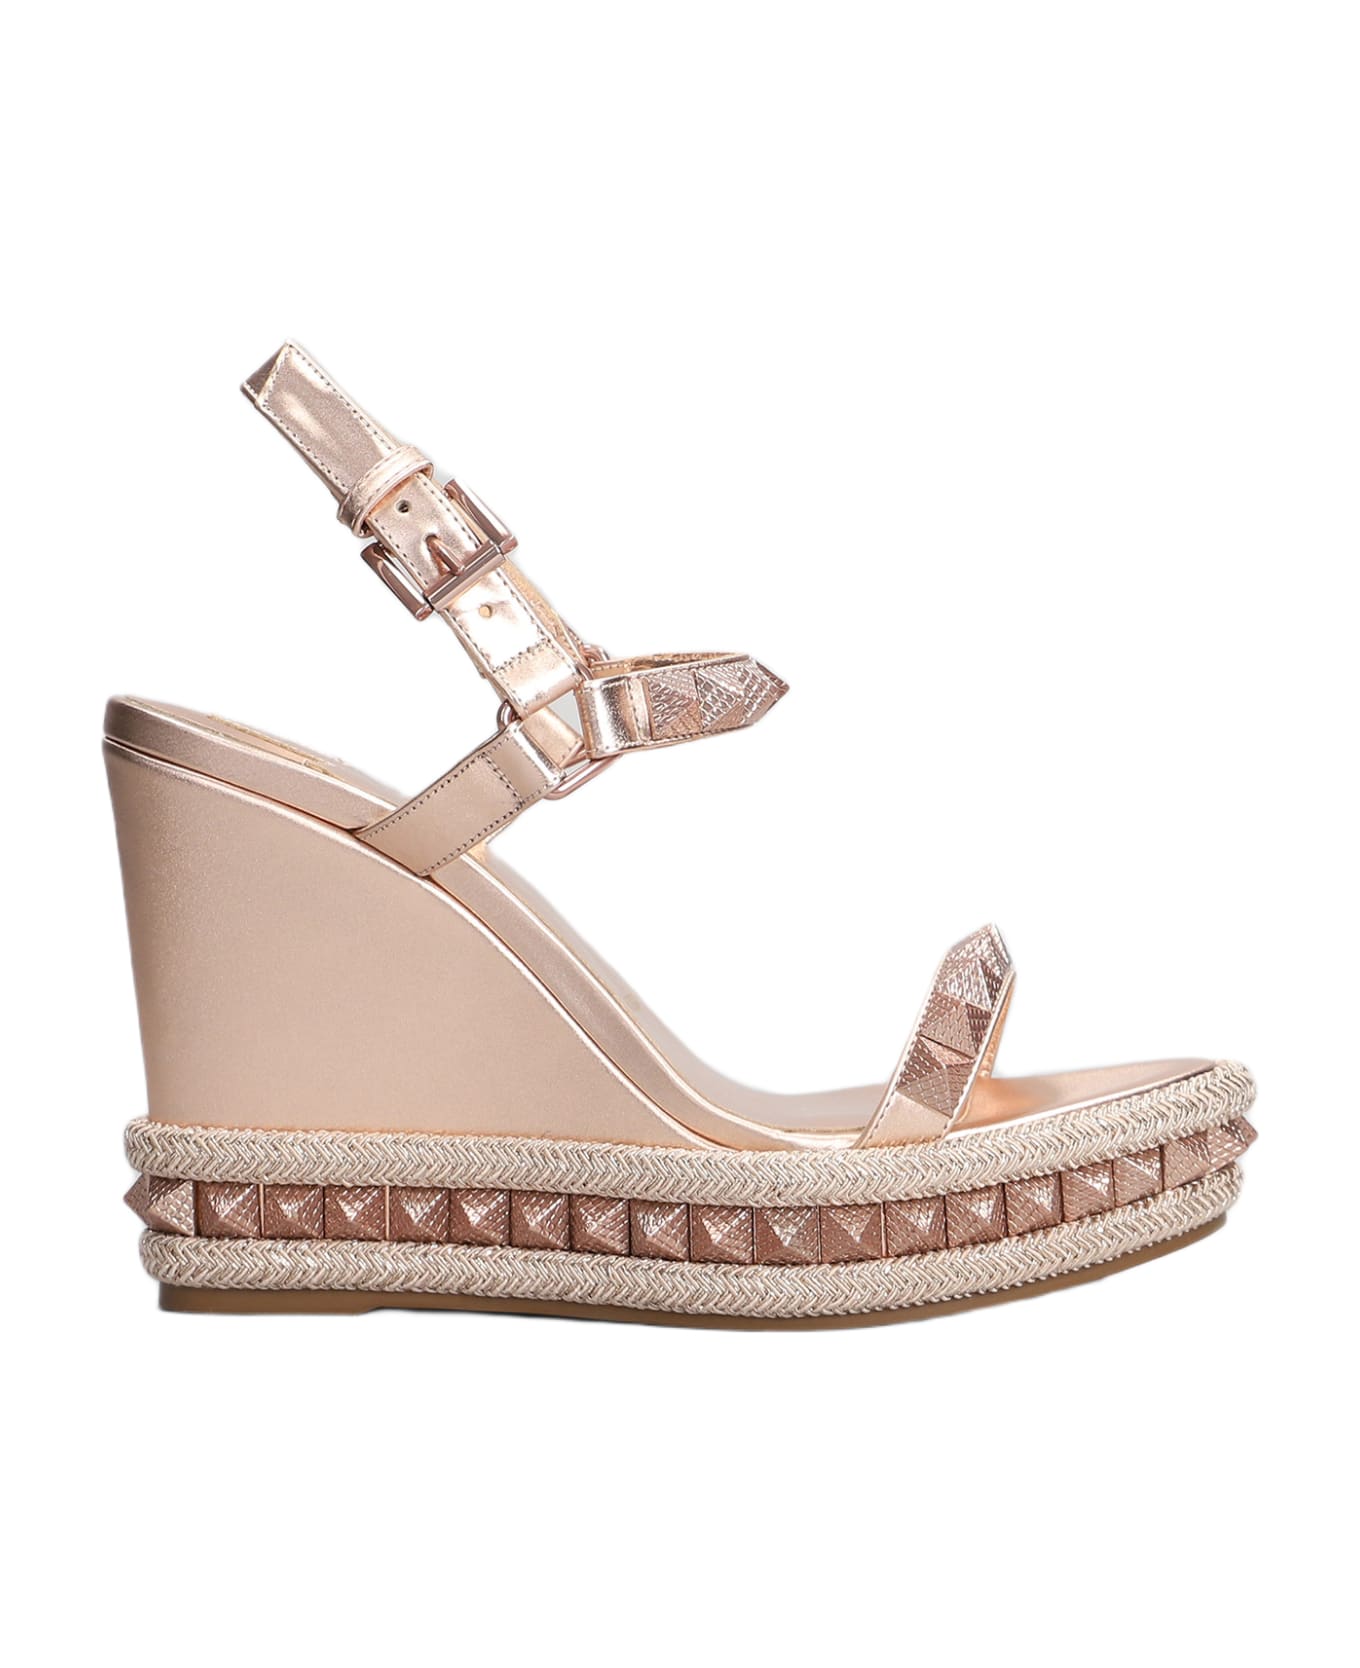 Christian Louboutin Pyraclou 110 Sandals In Rose-pink Leather - rose-pink